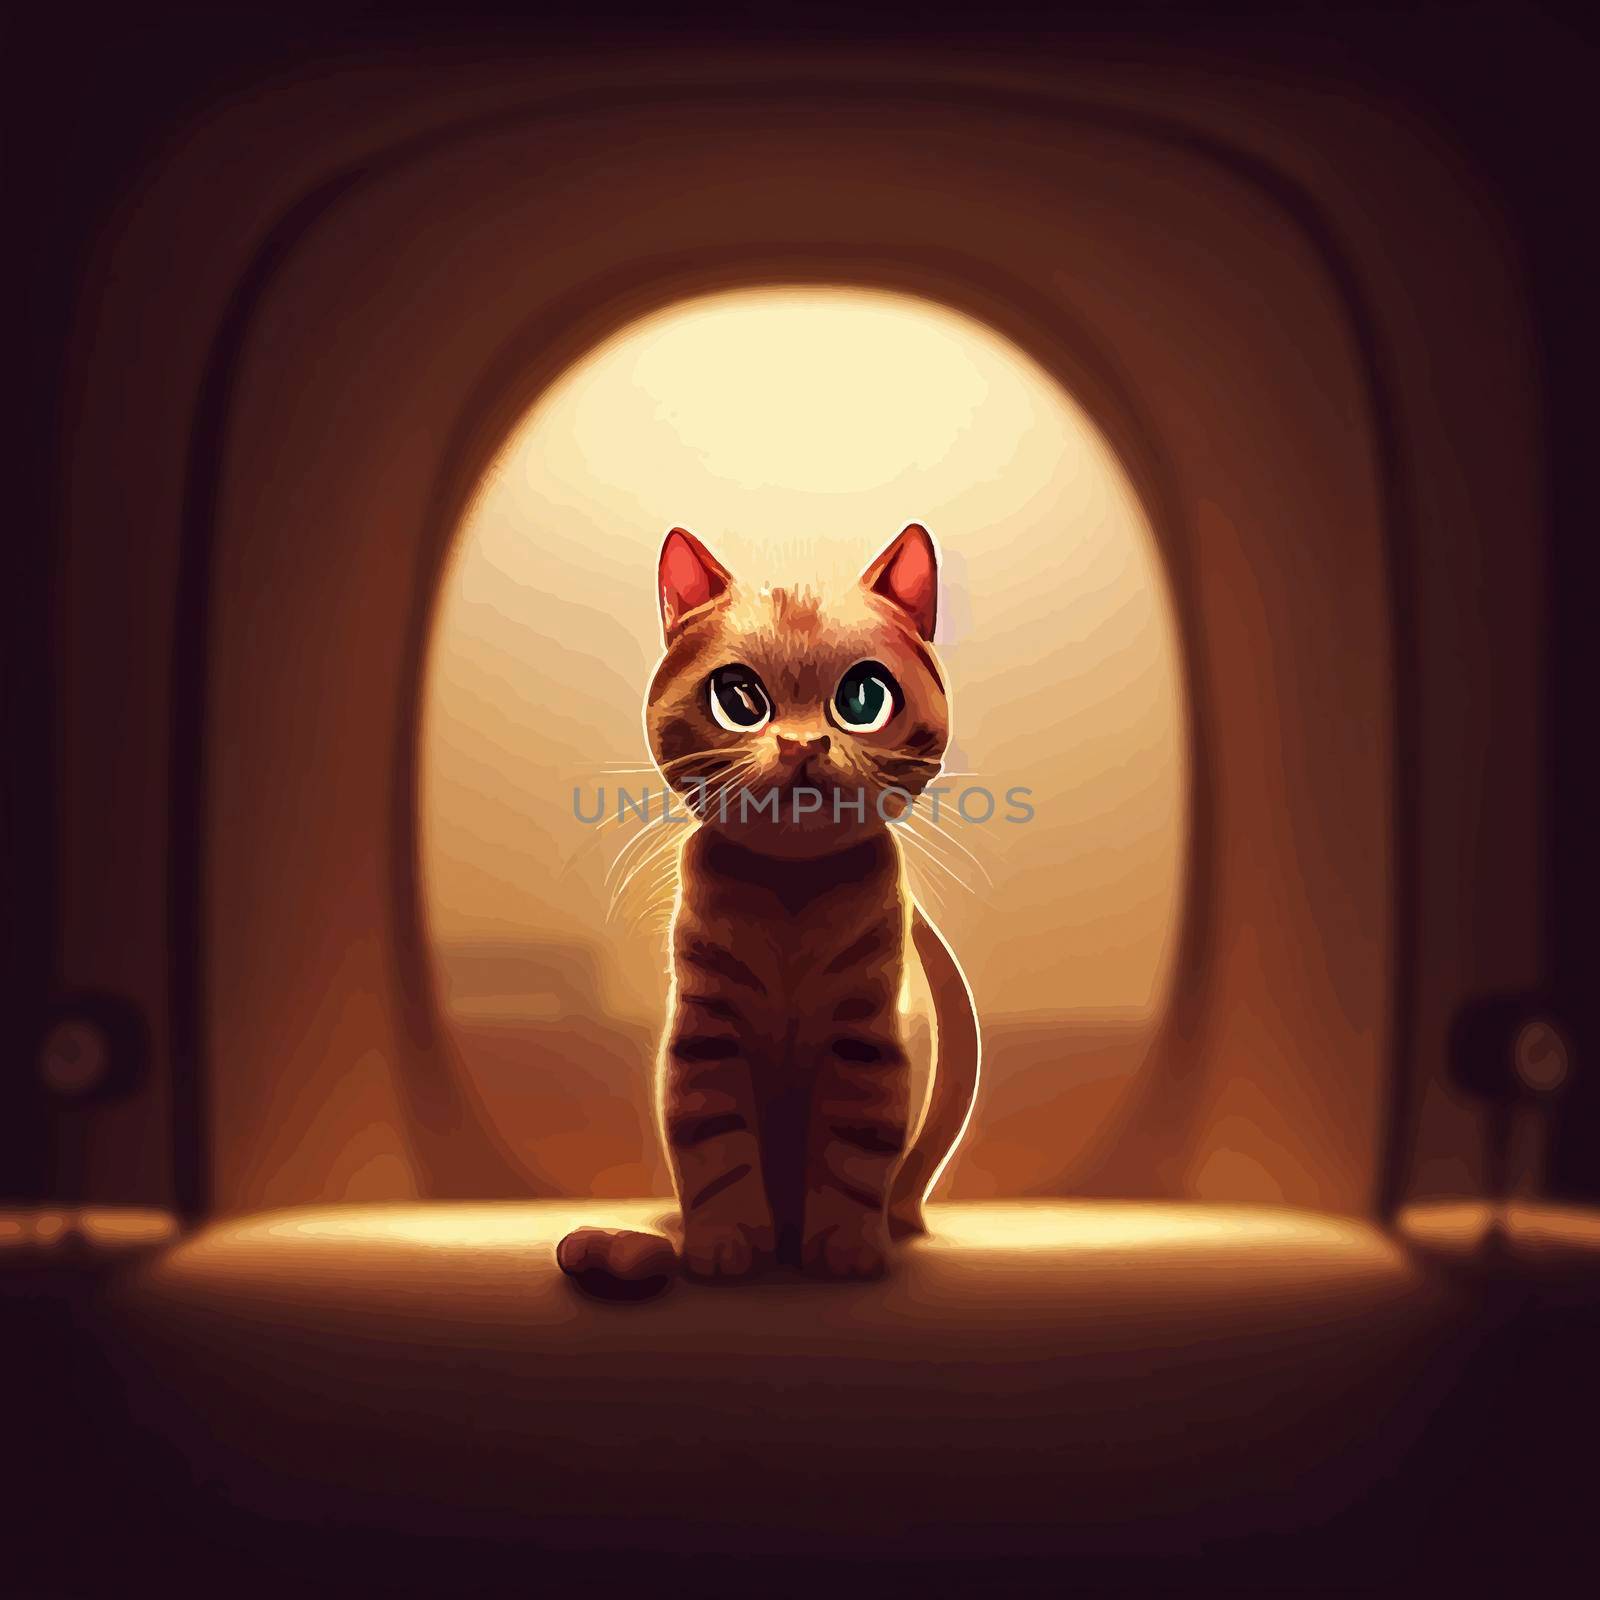 animated illustration of a cute cat, animated baby cat portrait.